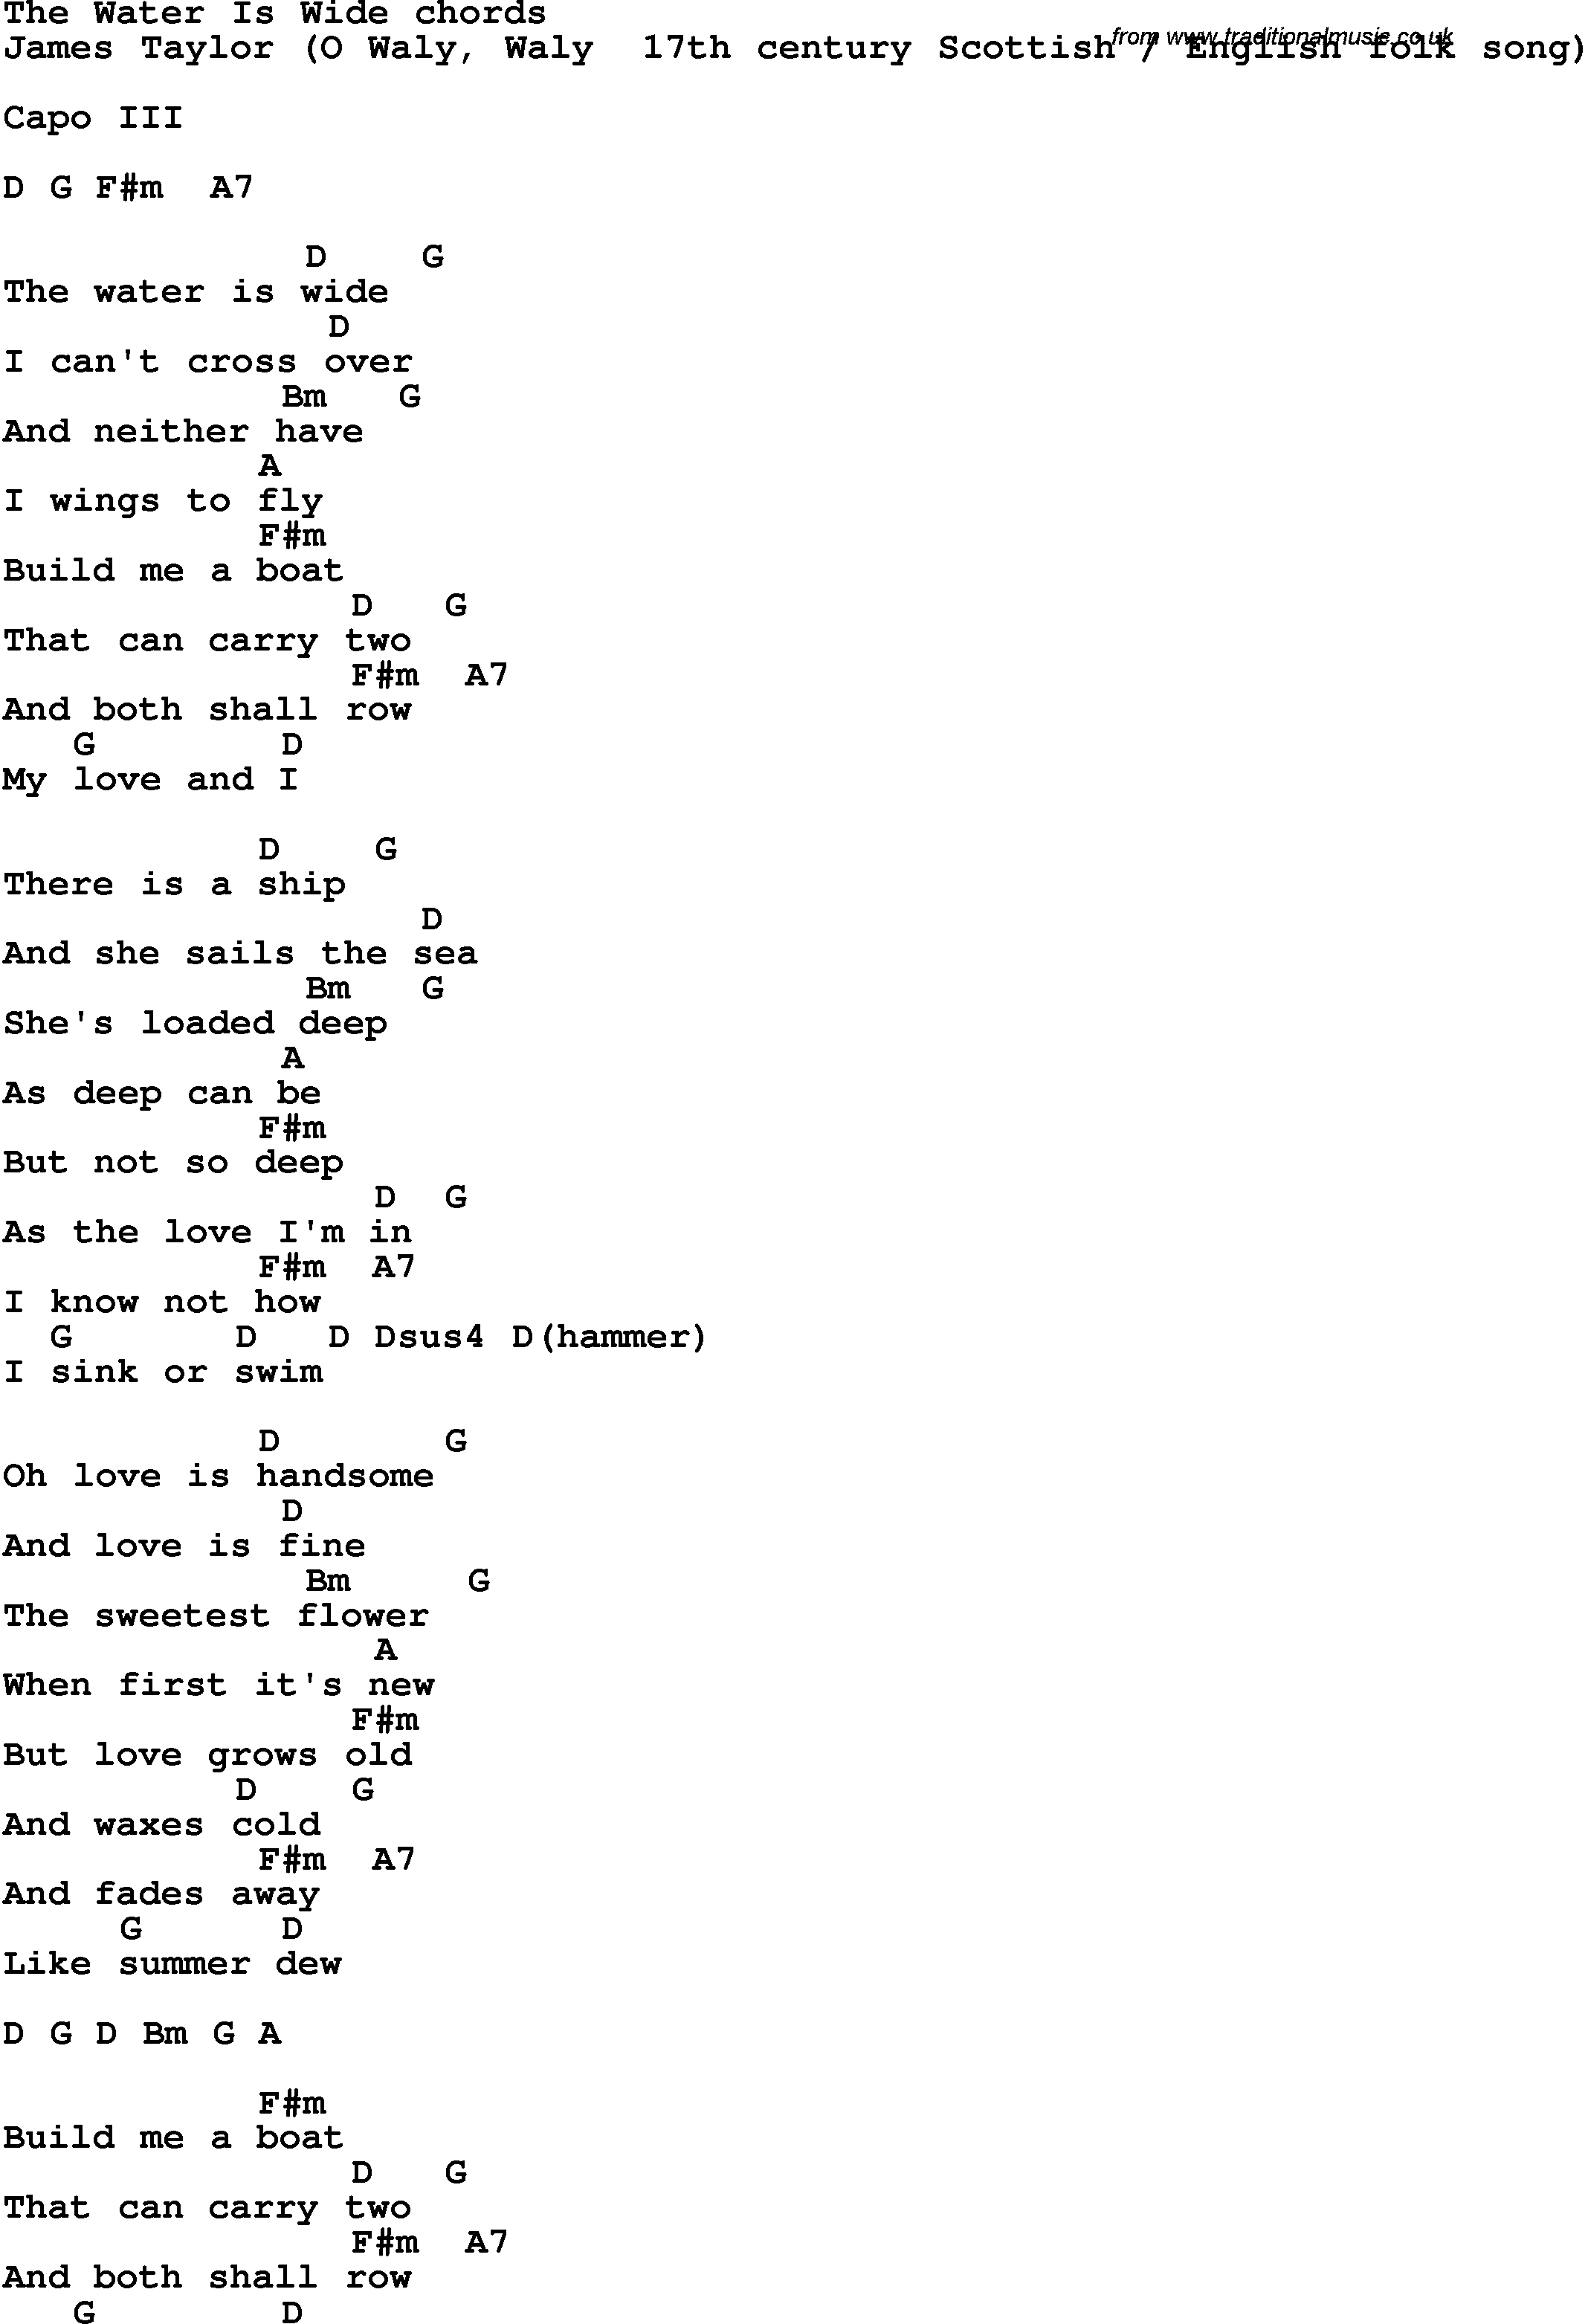 Cold Water Chords Song Lyrics With Guitar Chords For The Water Is Wide James Taylor